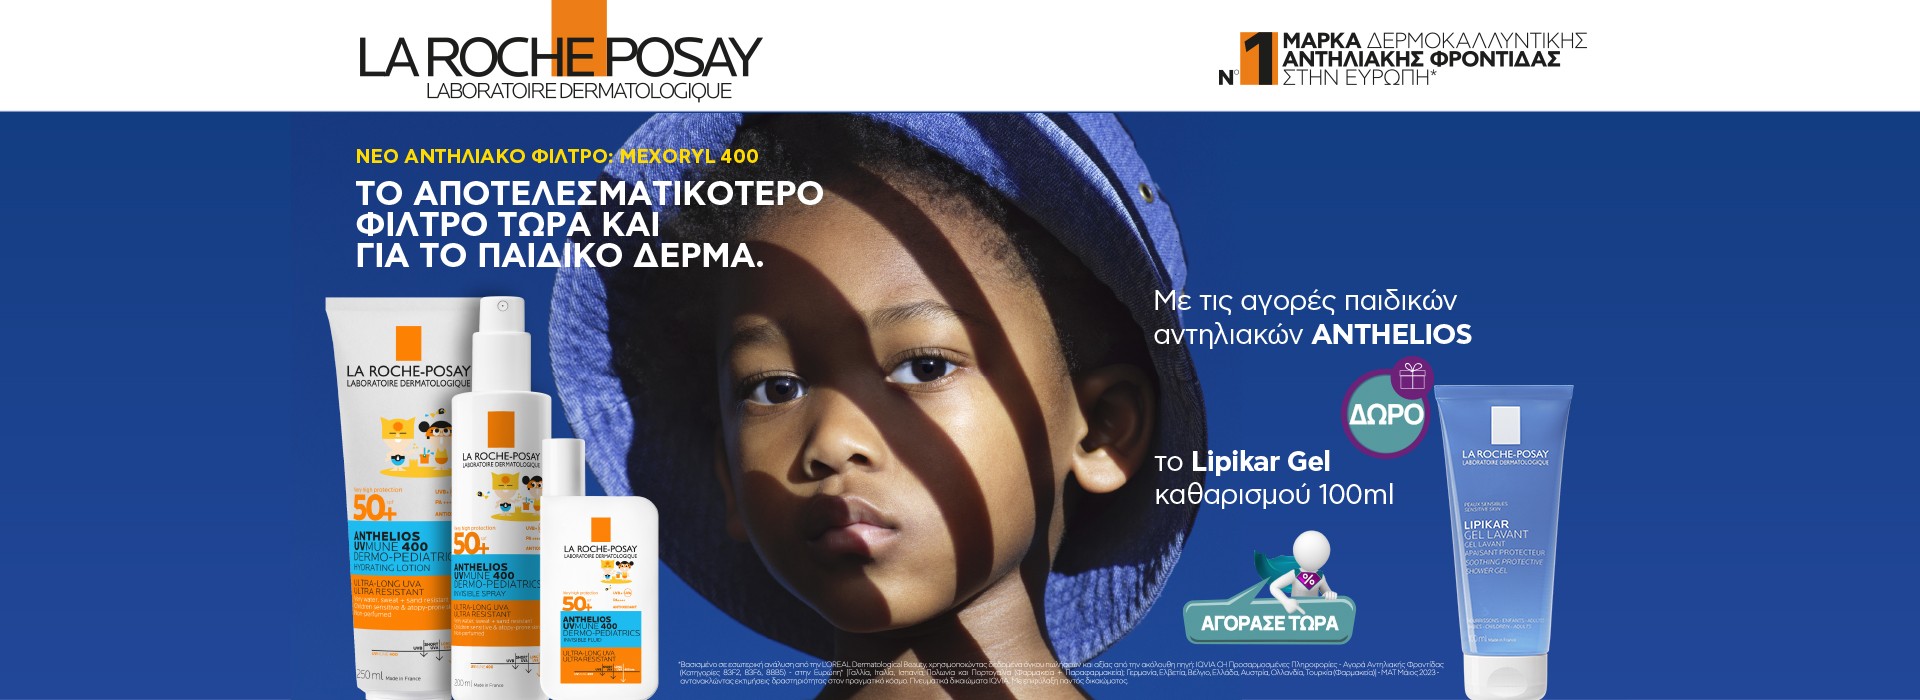 La Roche Posay Anthelios May